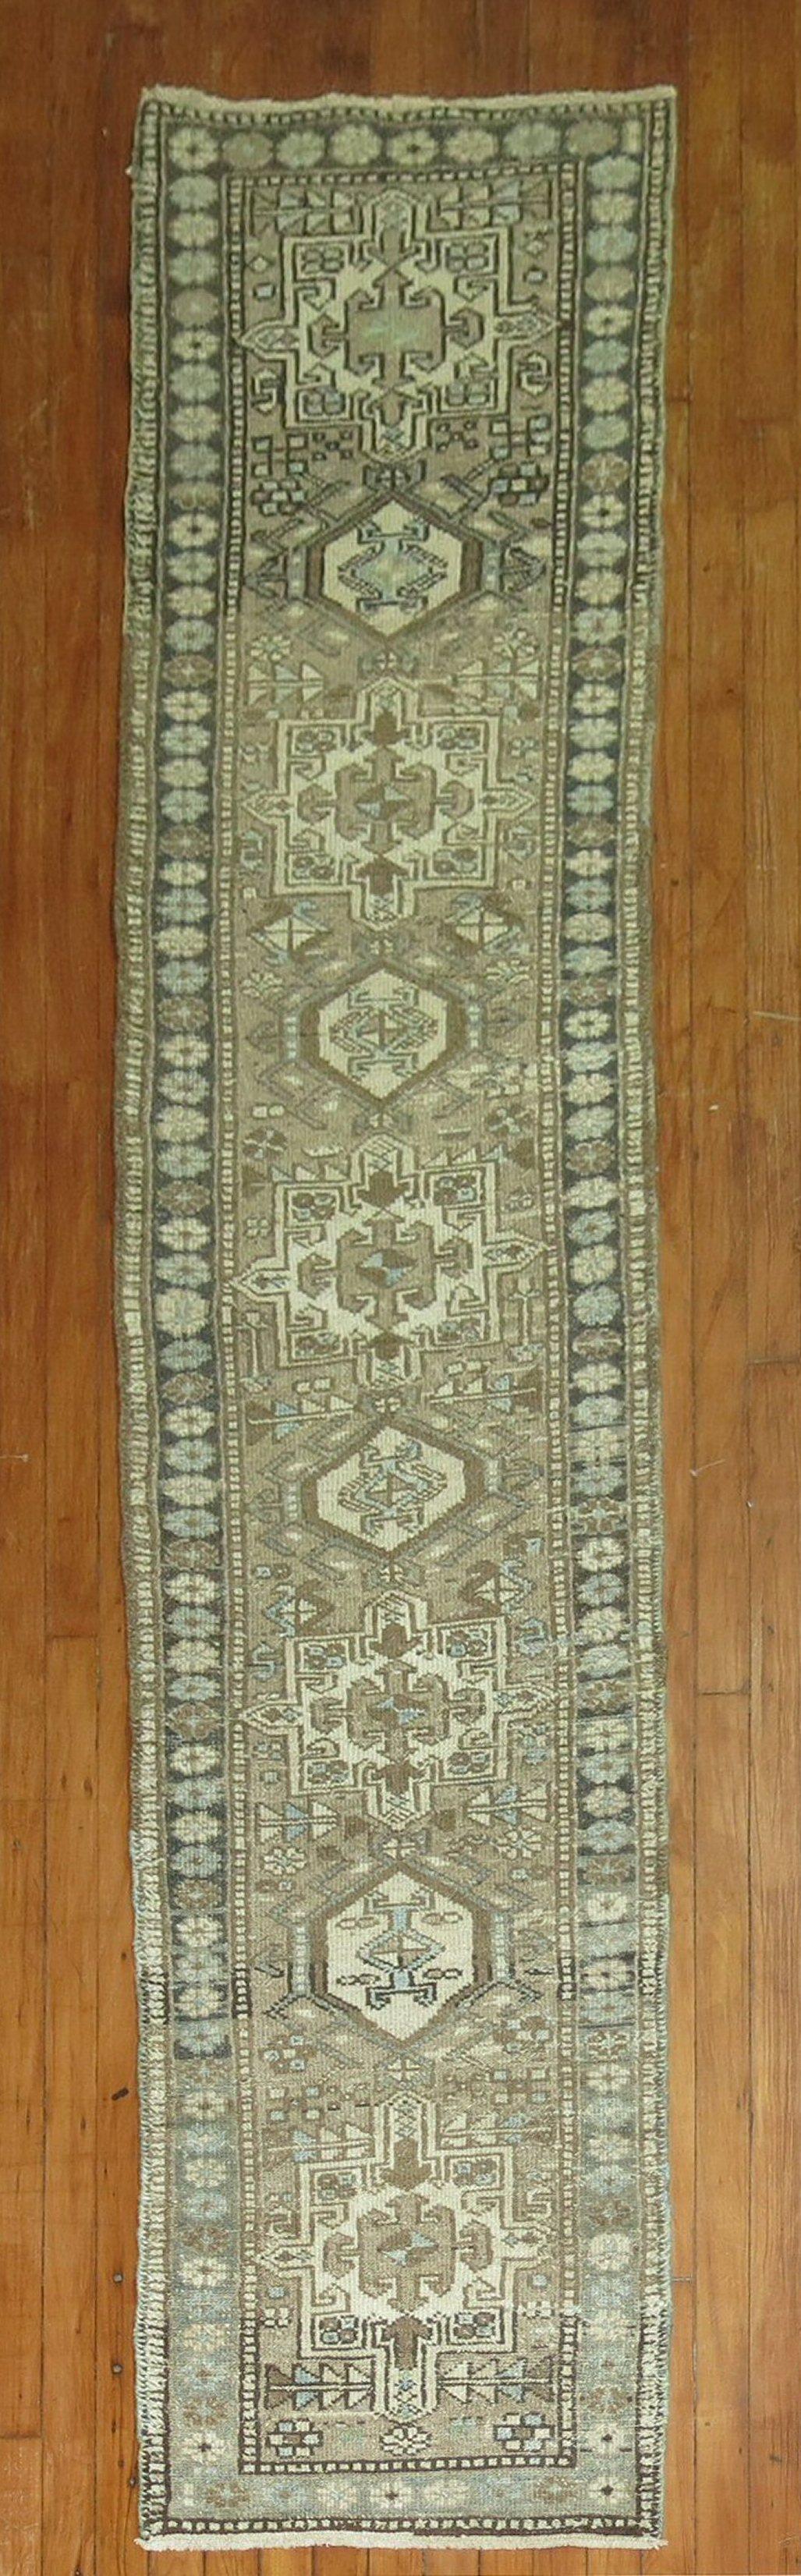 Rustic Narrow Antique Heriz Persian Runner in Slate Charcoal Brown Blue Accents For Sale